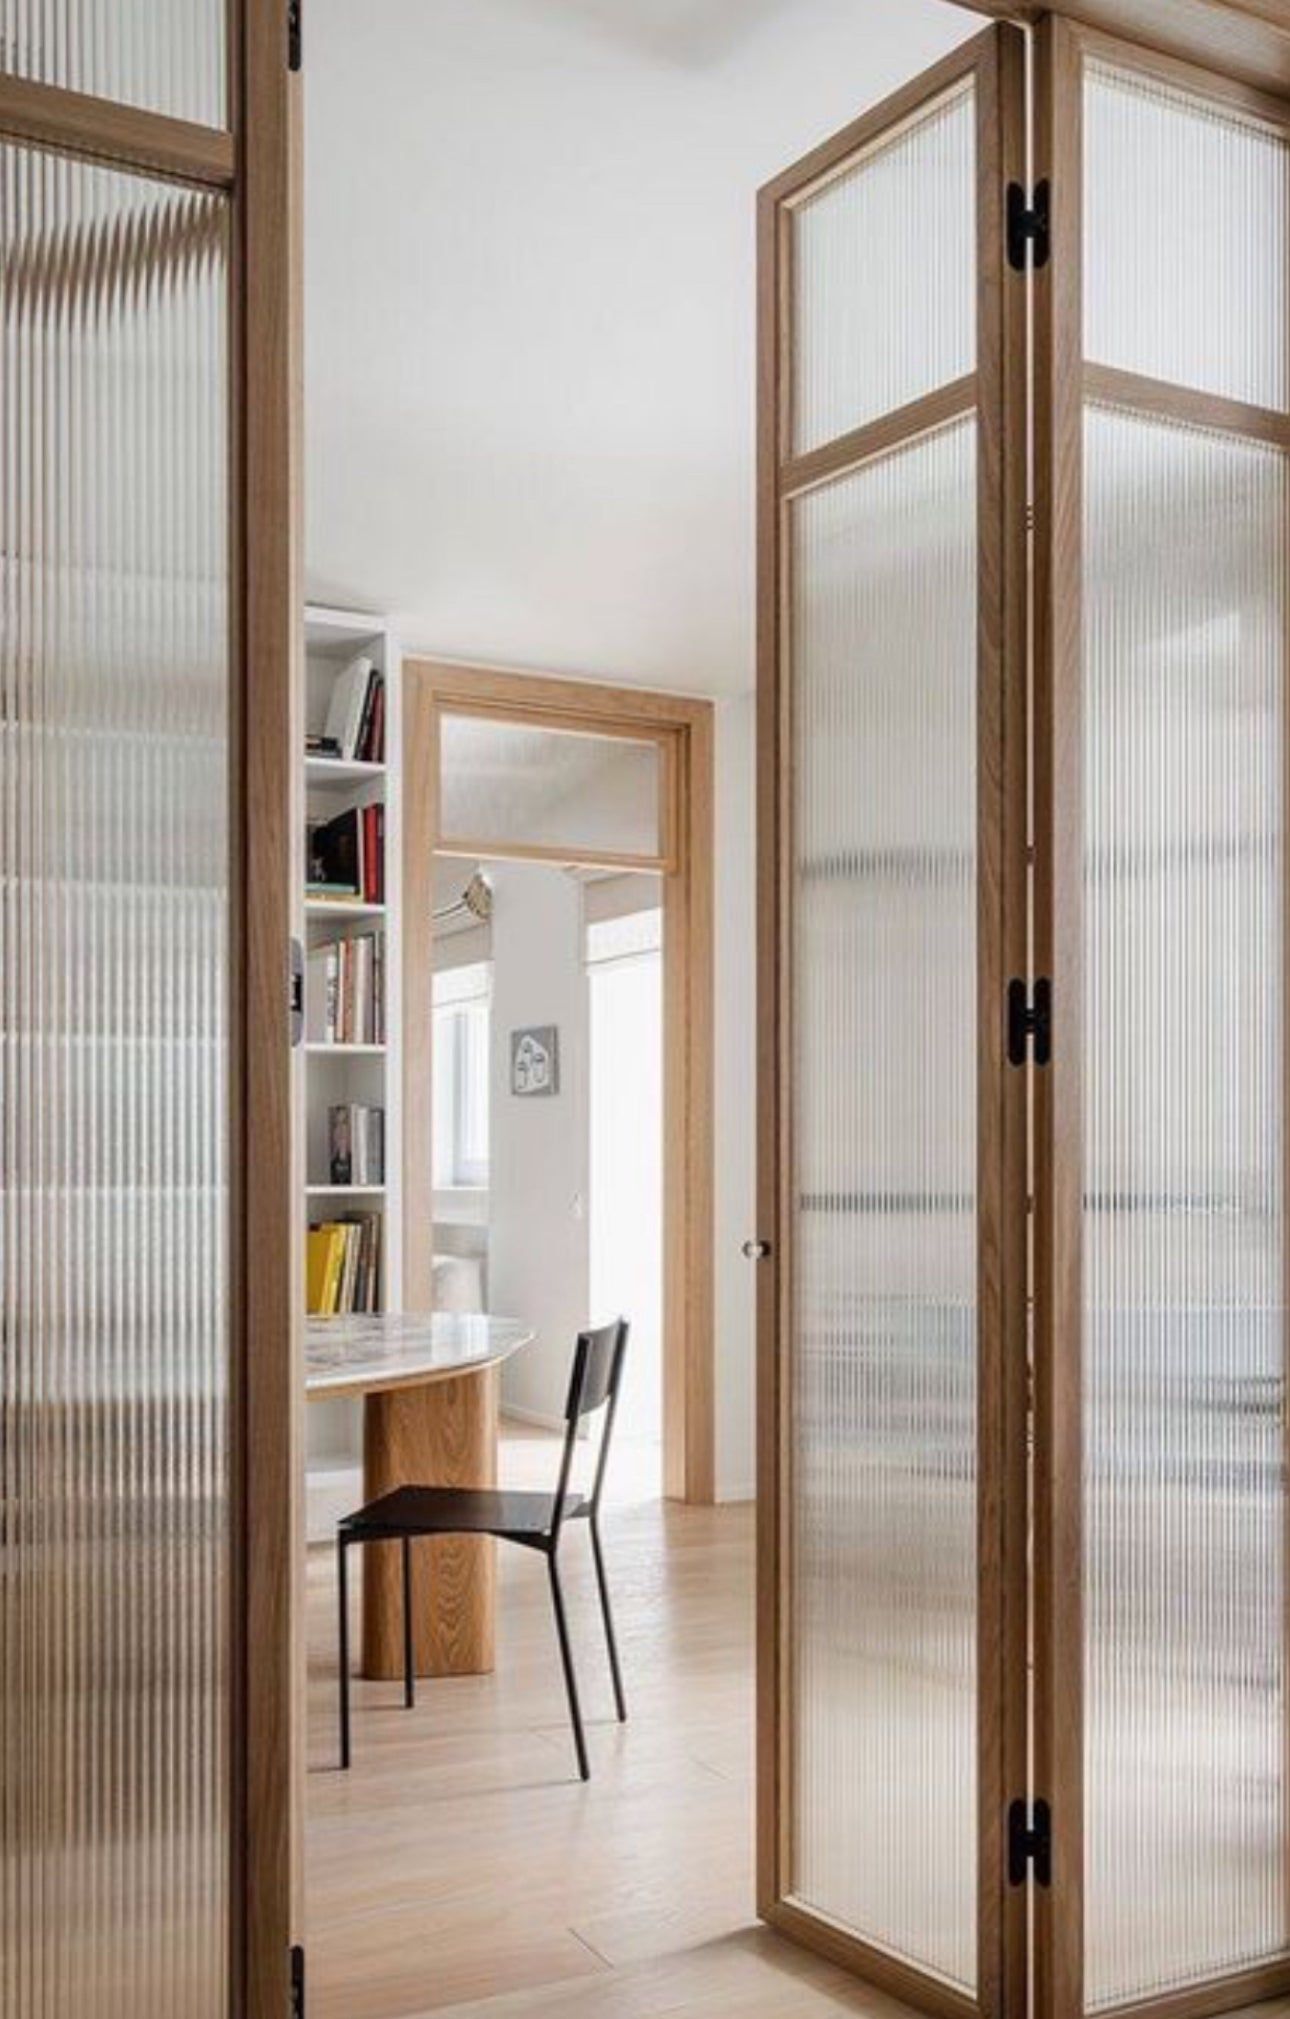 Maximizing Space and Style: The Benefits of Installing Folding Doors as Interior Room Dividers